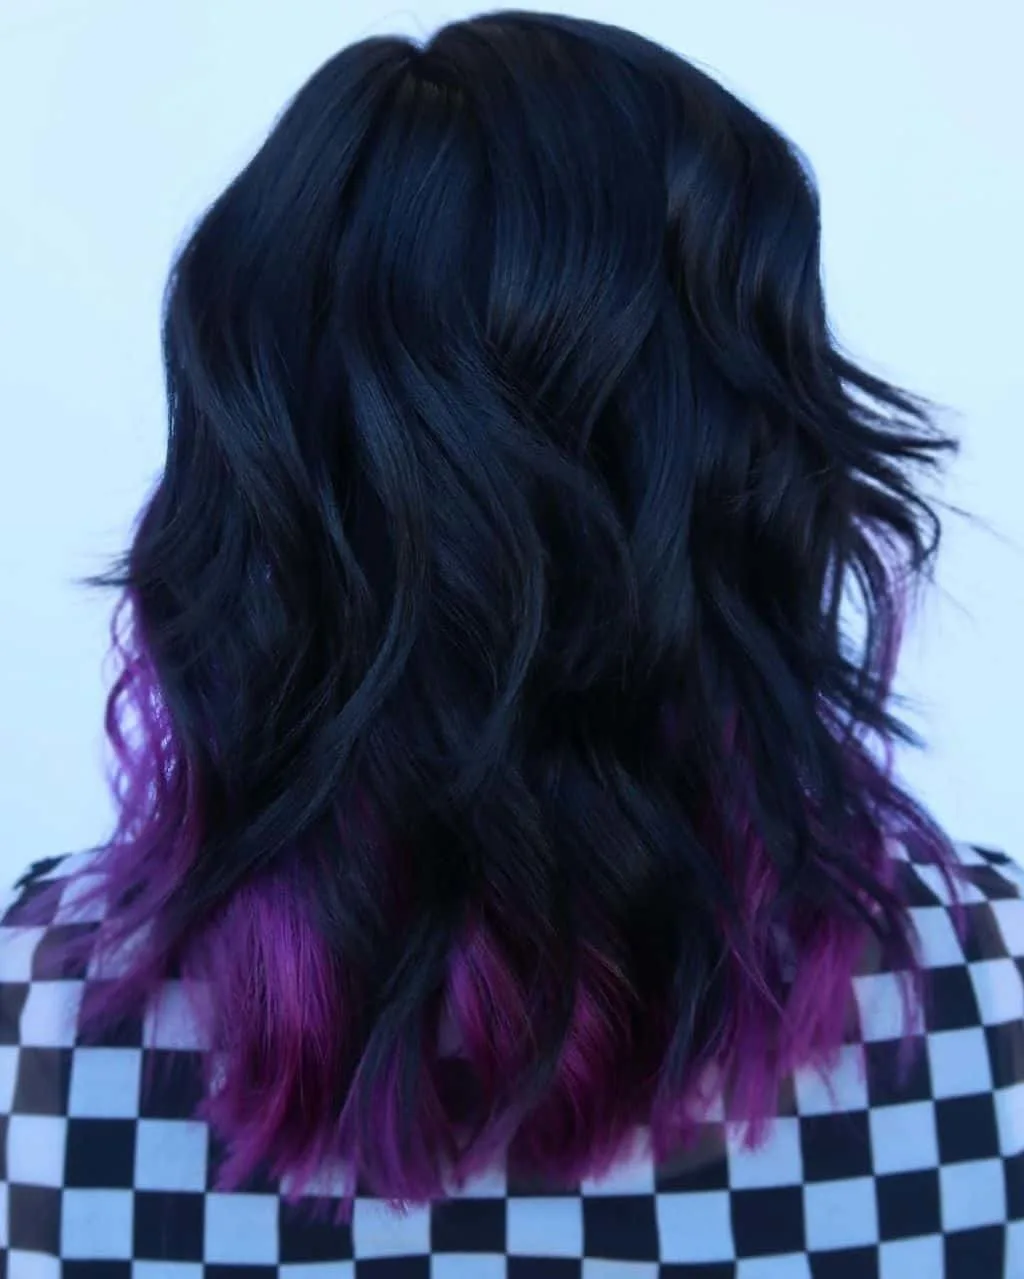 Black Hairstyle with Purple Underneath